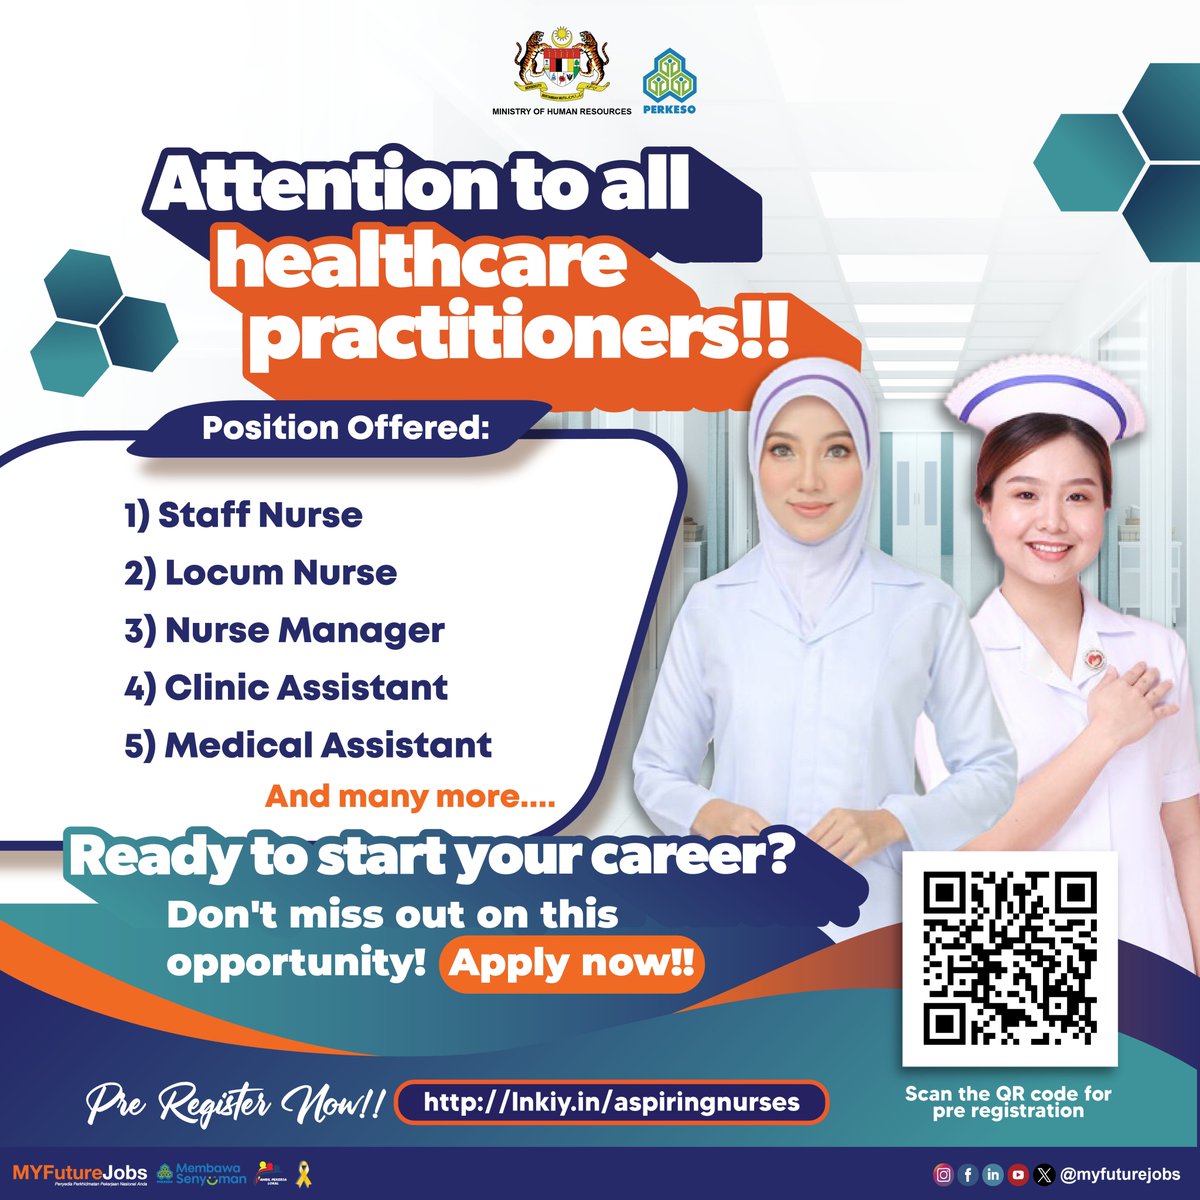 Good News For all Healthcare Practitioners!

There are tons of medical positions ready to be filled by you.

Grab this opportunity and start your career by registering at lnkiy.in/aspiringnurses

#PERKESO #MYFutureJobs #healthcare #nurses #medicaljobs